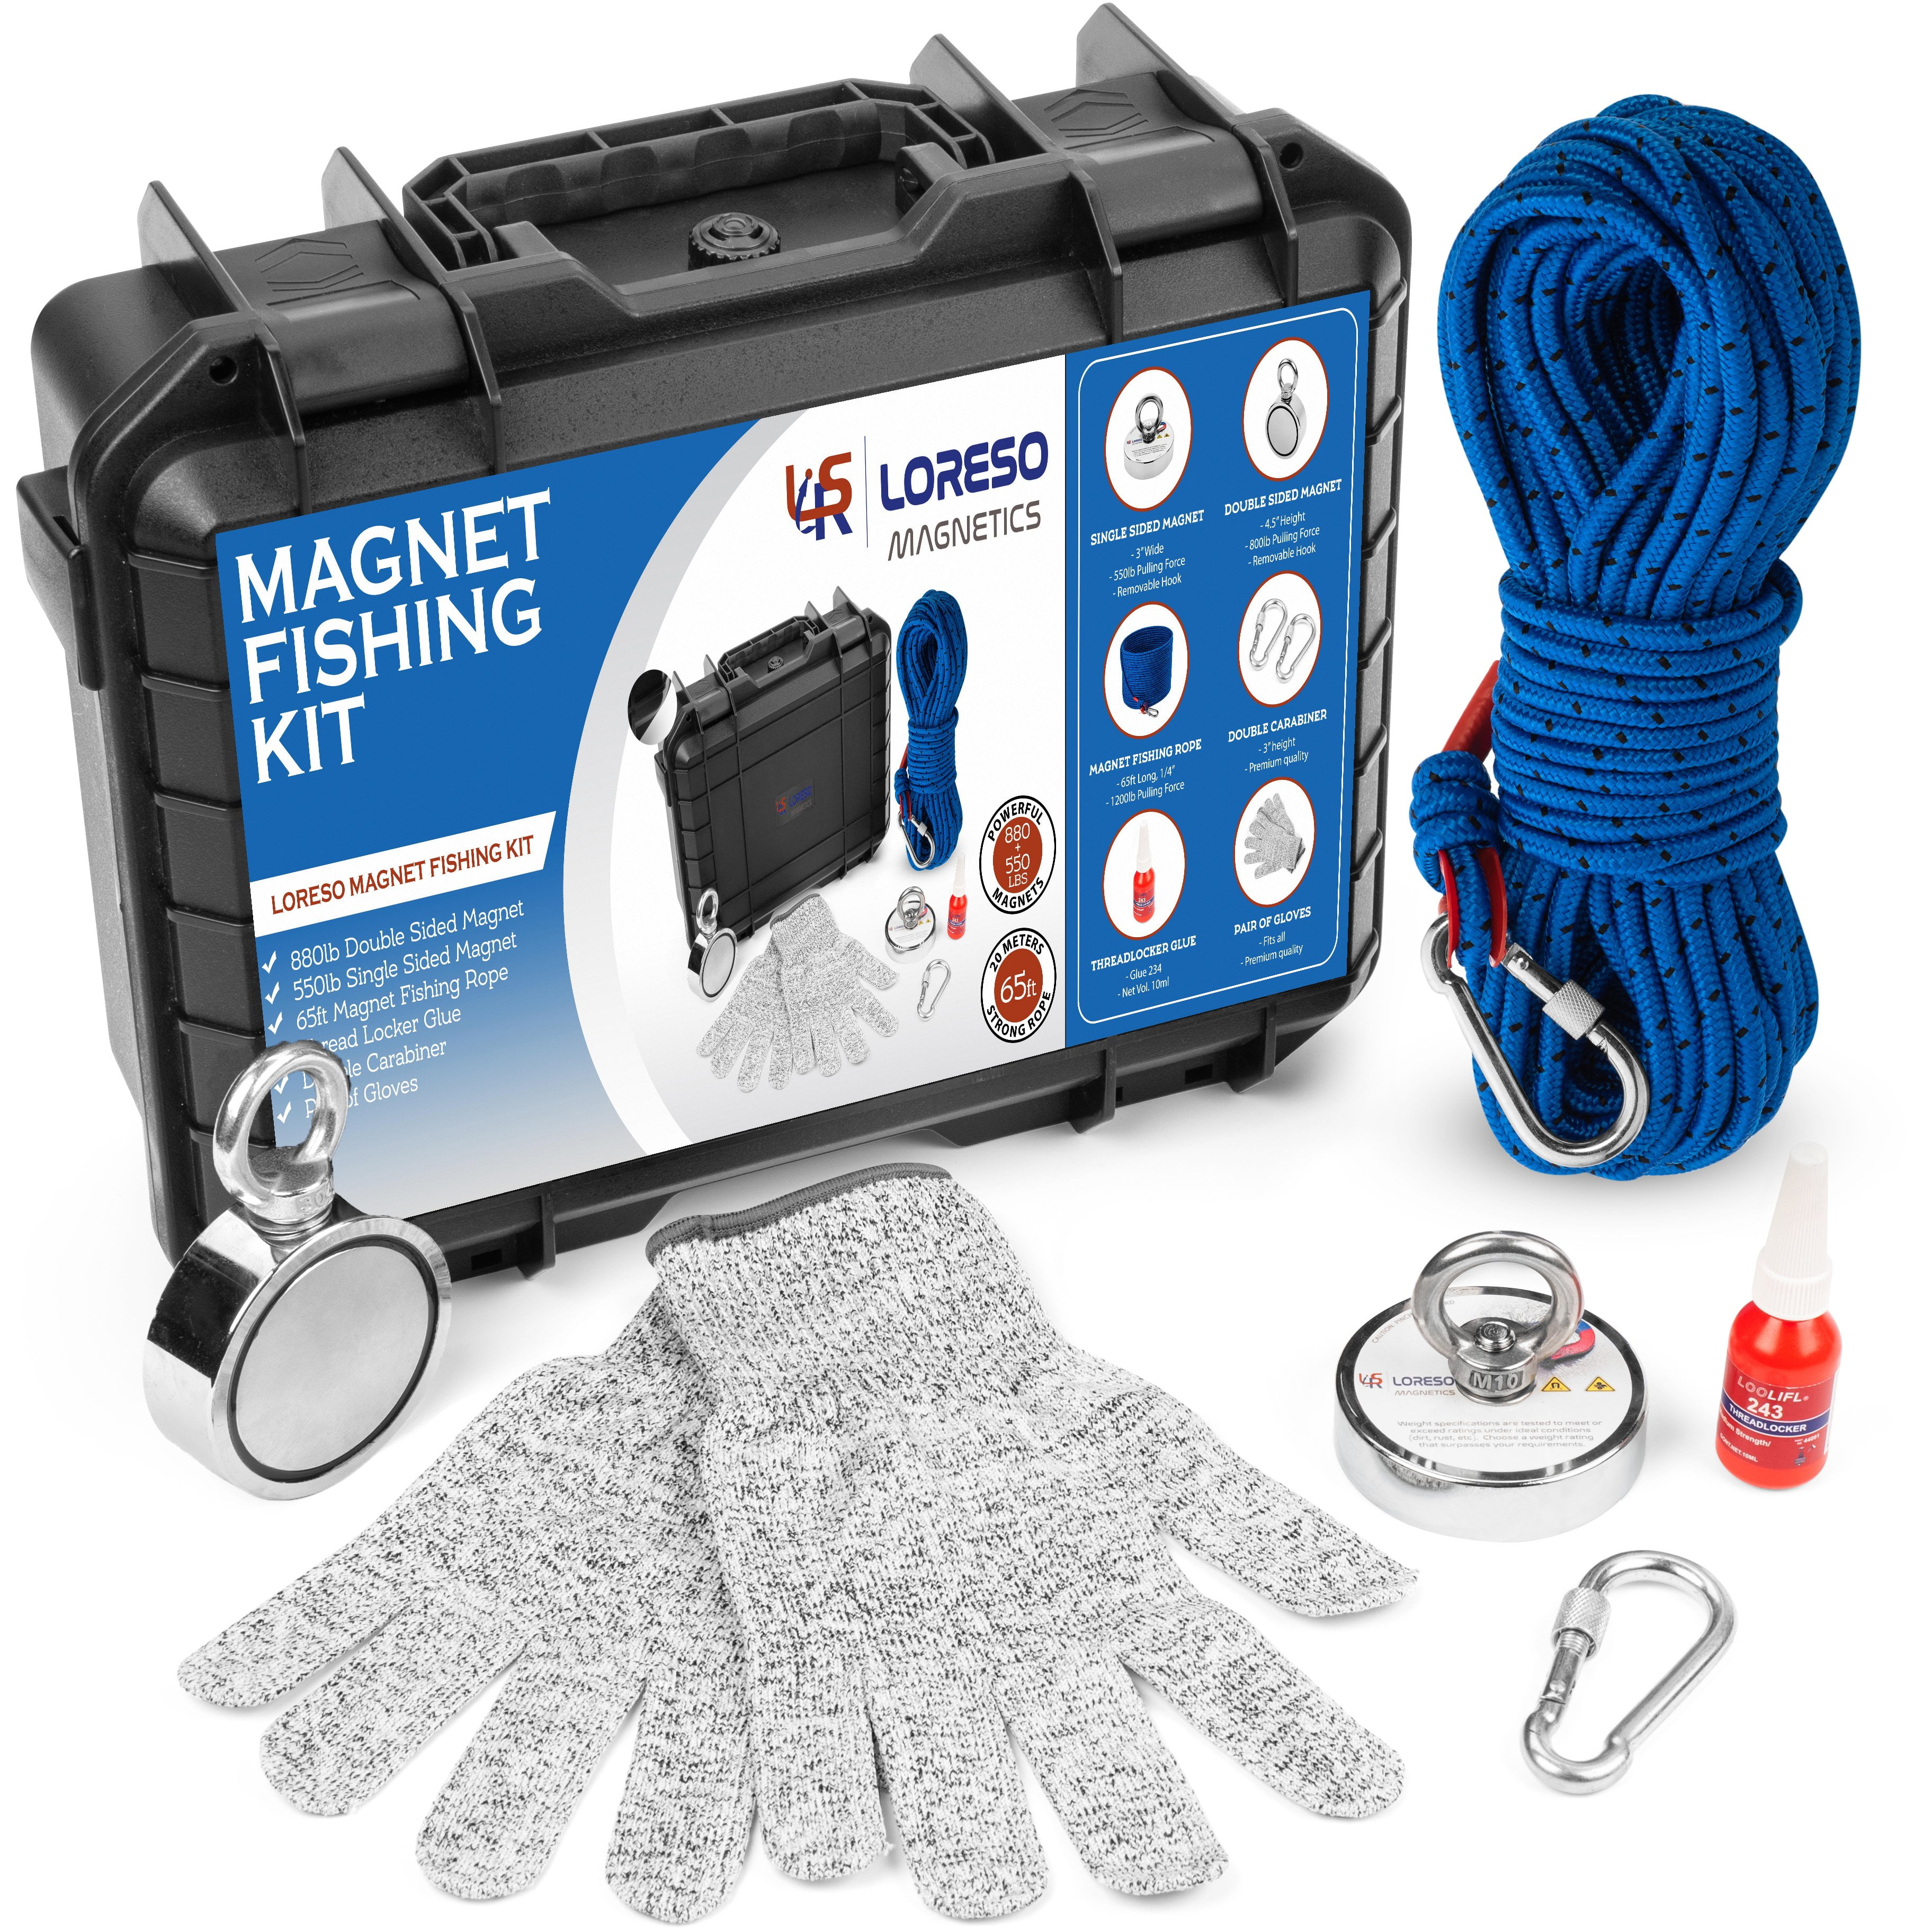 Uolor 300KG Pull Force Double Sided Complete Fishing Magnet Kit for Magnet  Fishing - Includes 20M Rope with Carabiner, Gloves, Threadlocker for  Retrieving Items in River, Lake, Beach, Lawn : : Sports